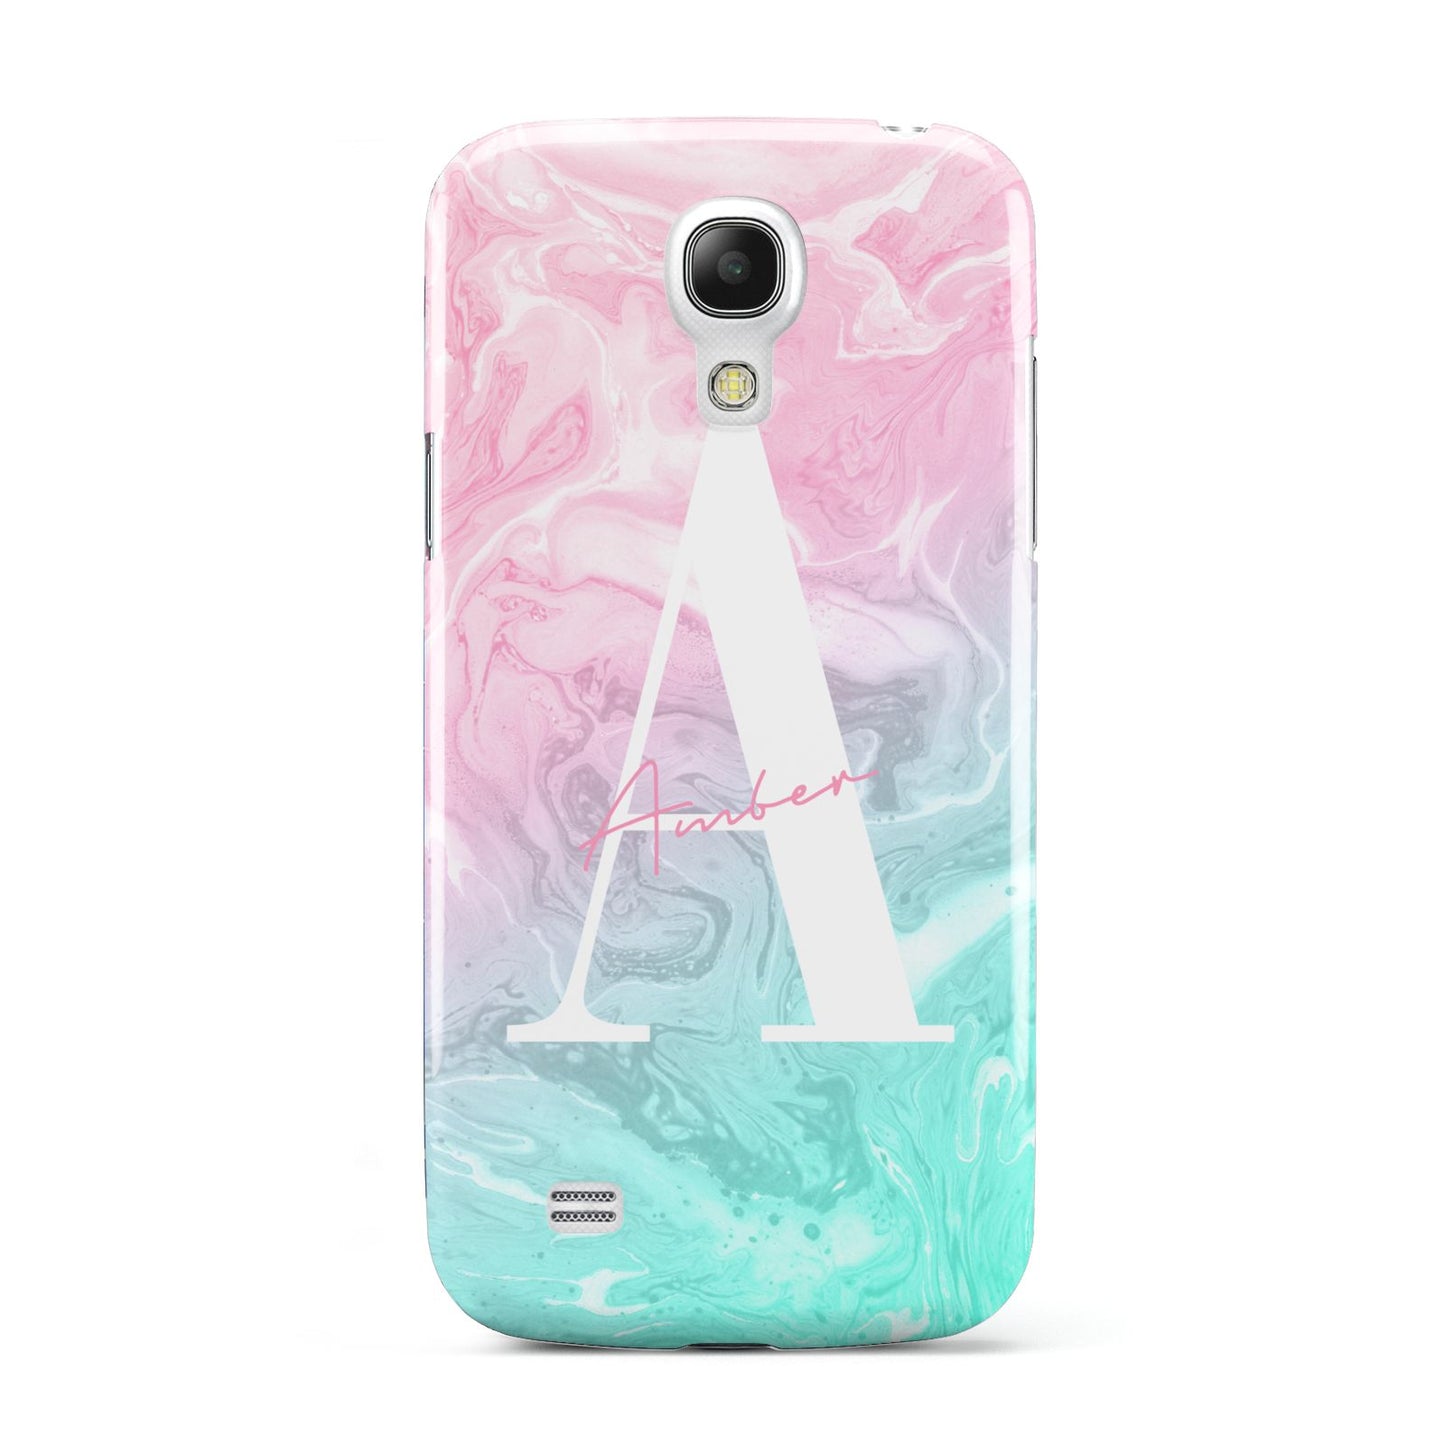 Monogrammed Pink Turquoise Pastel Marble Samsung Galaxy S4 Mini Case